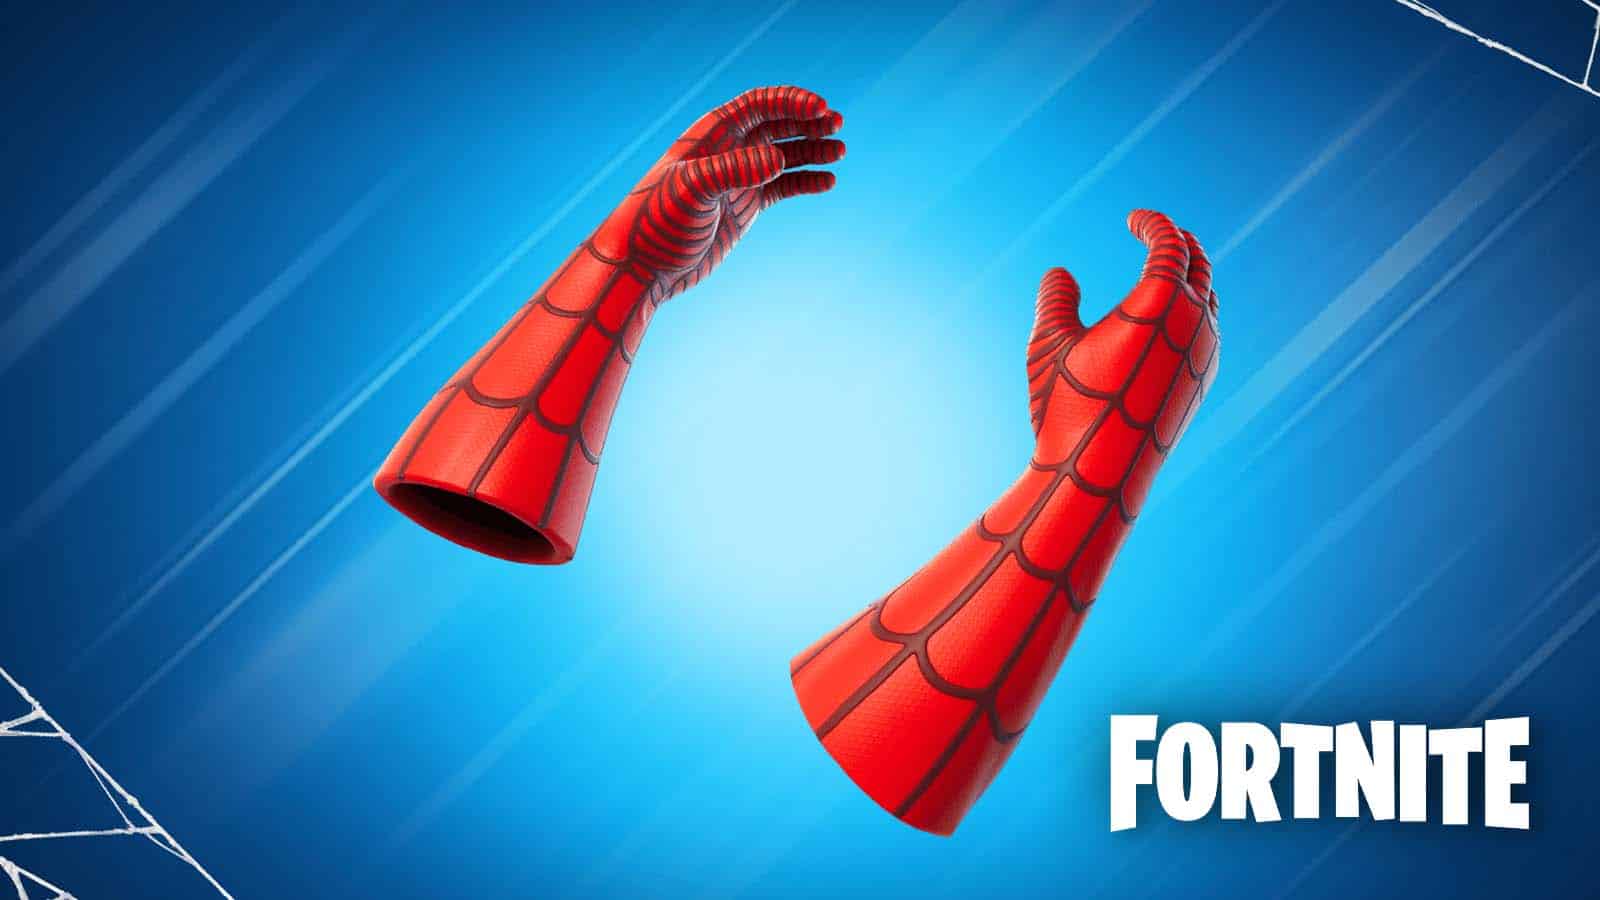 Fortnite nerfed Web Shooters, Armored Wall and Supply Drops in Competitive